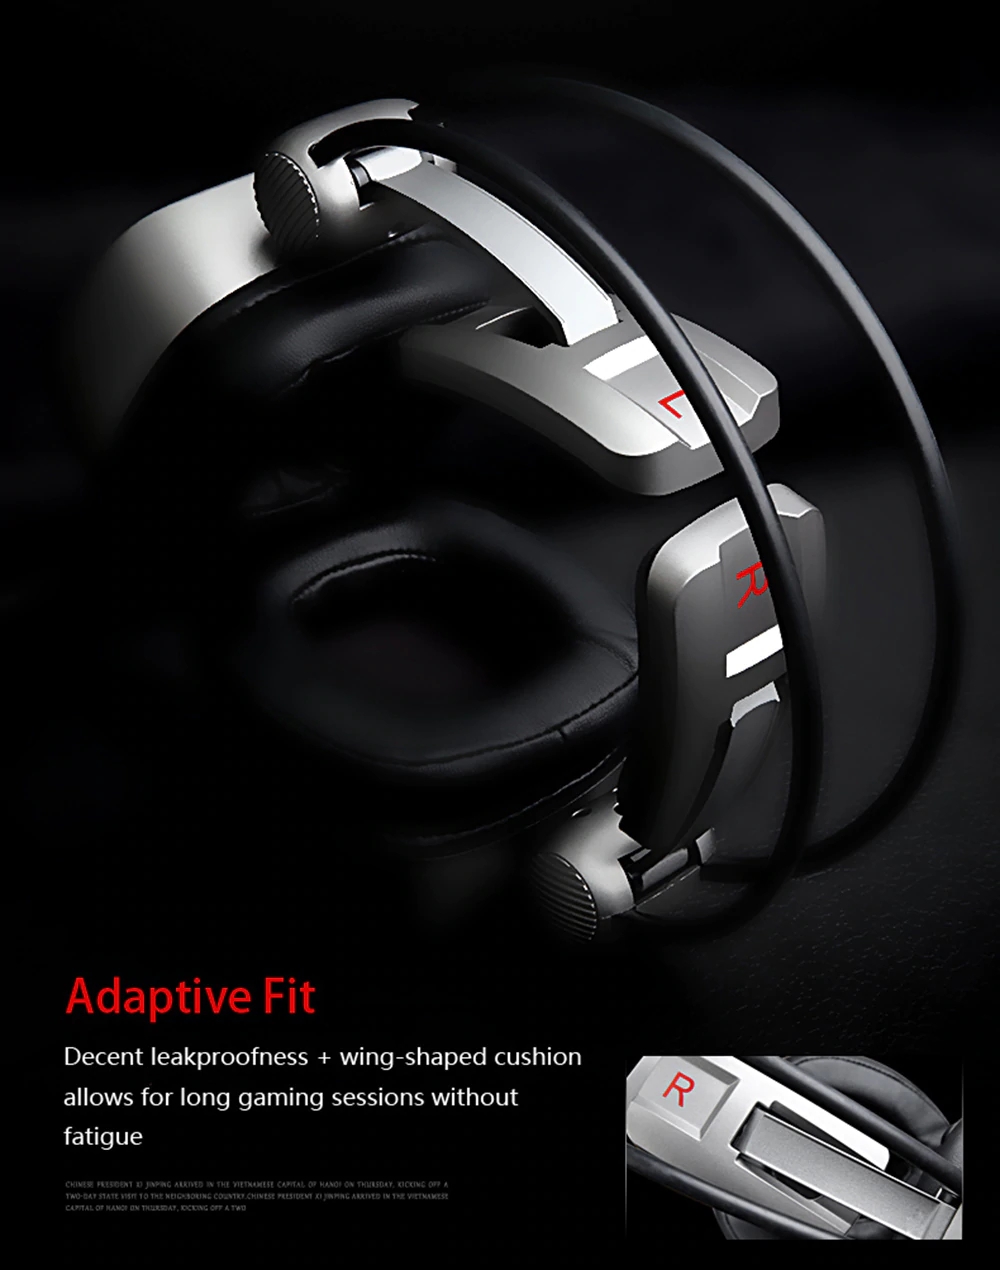 Xiberia S21 USB Wired 7.1 Surround Sound Stereo Gaming Headphone Headset with Mic 11